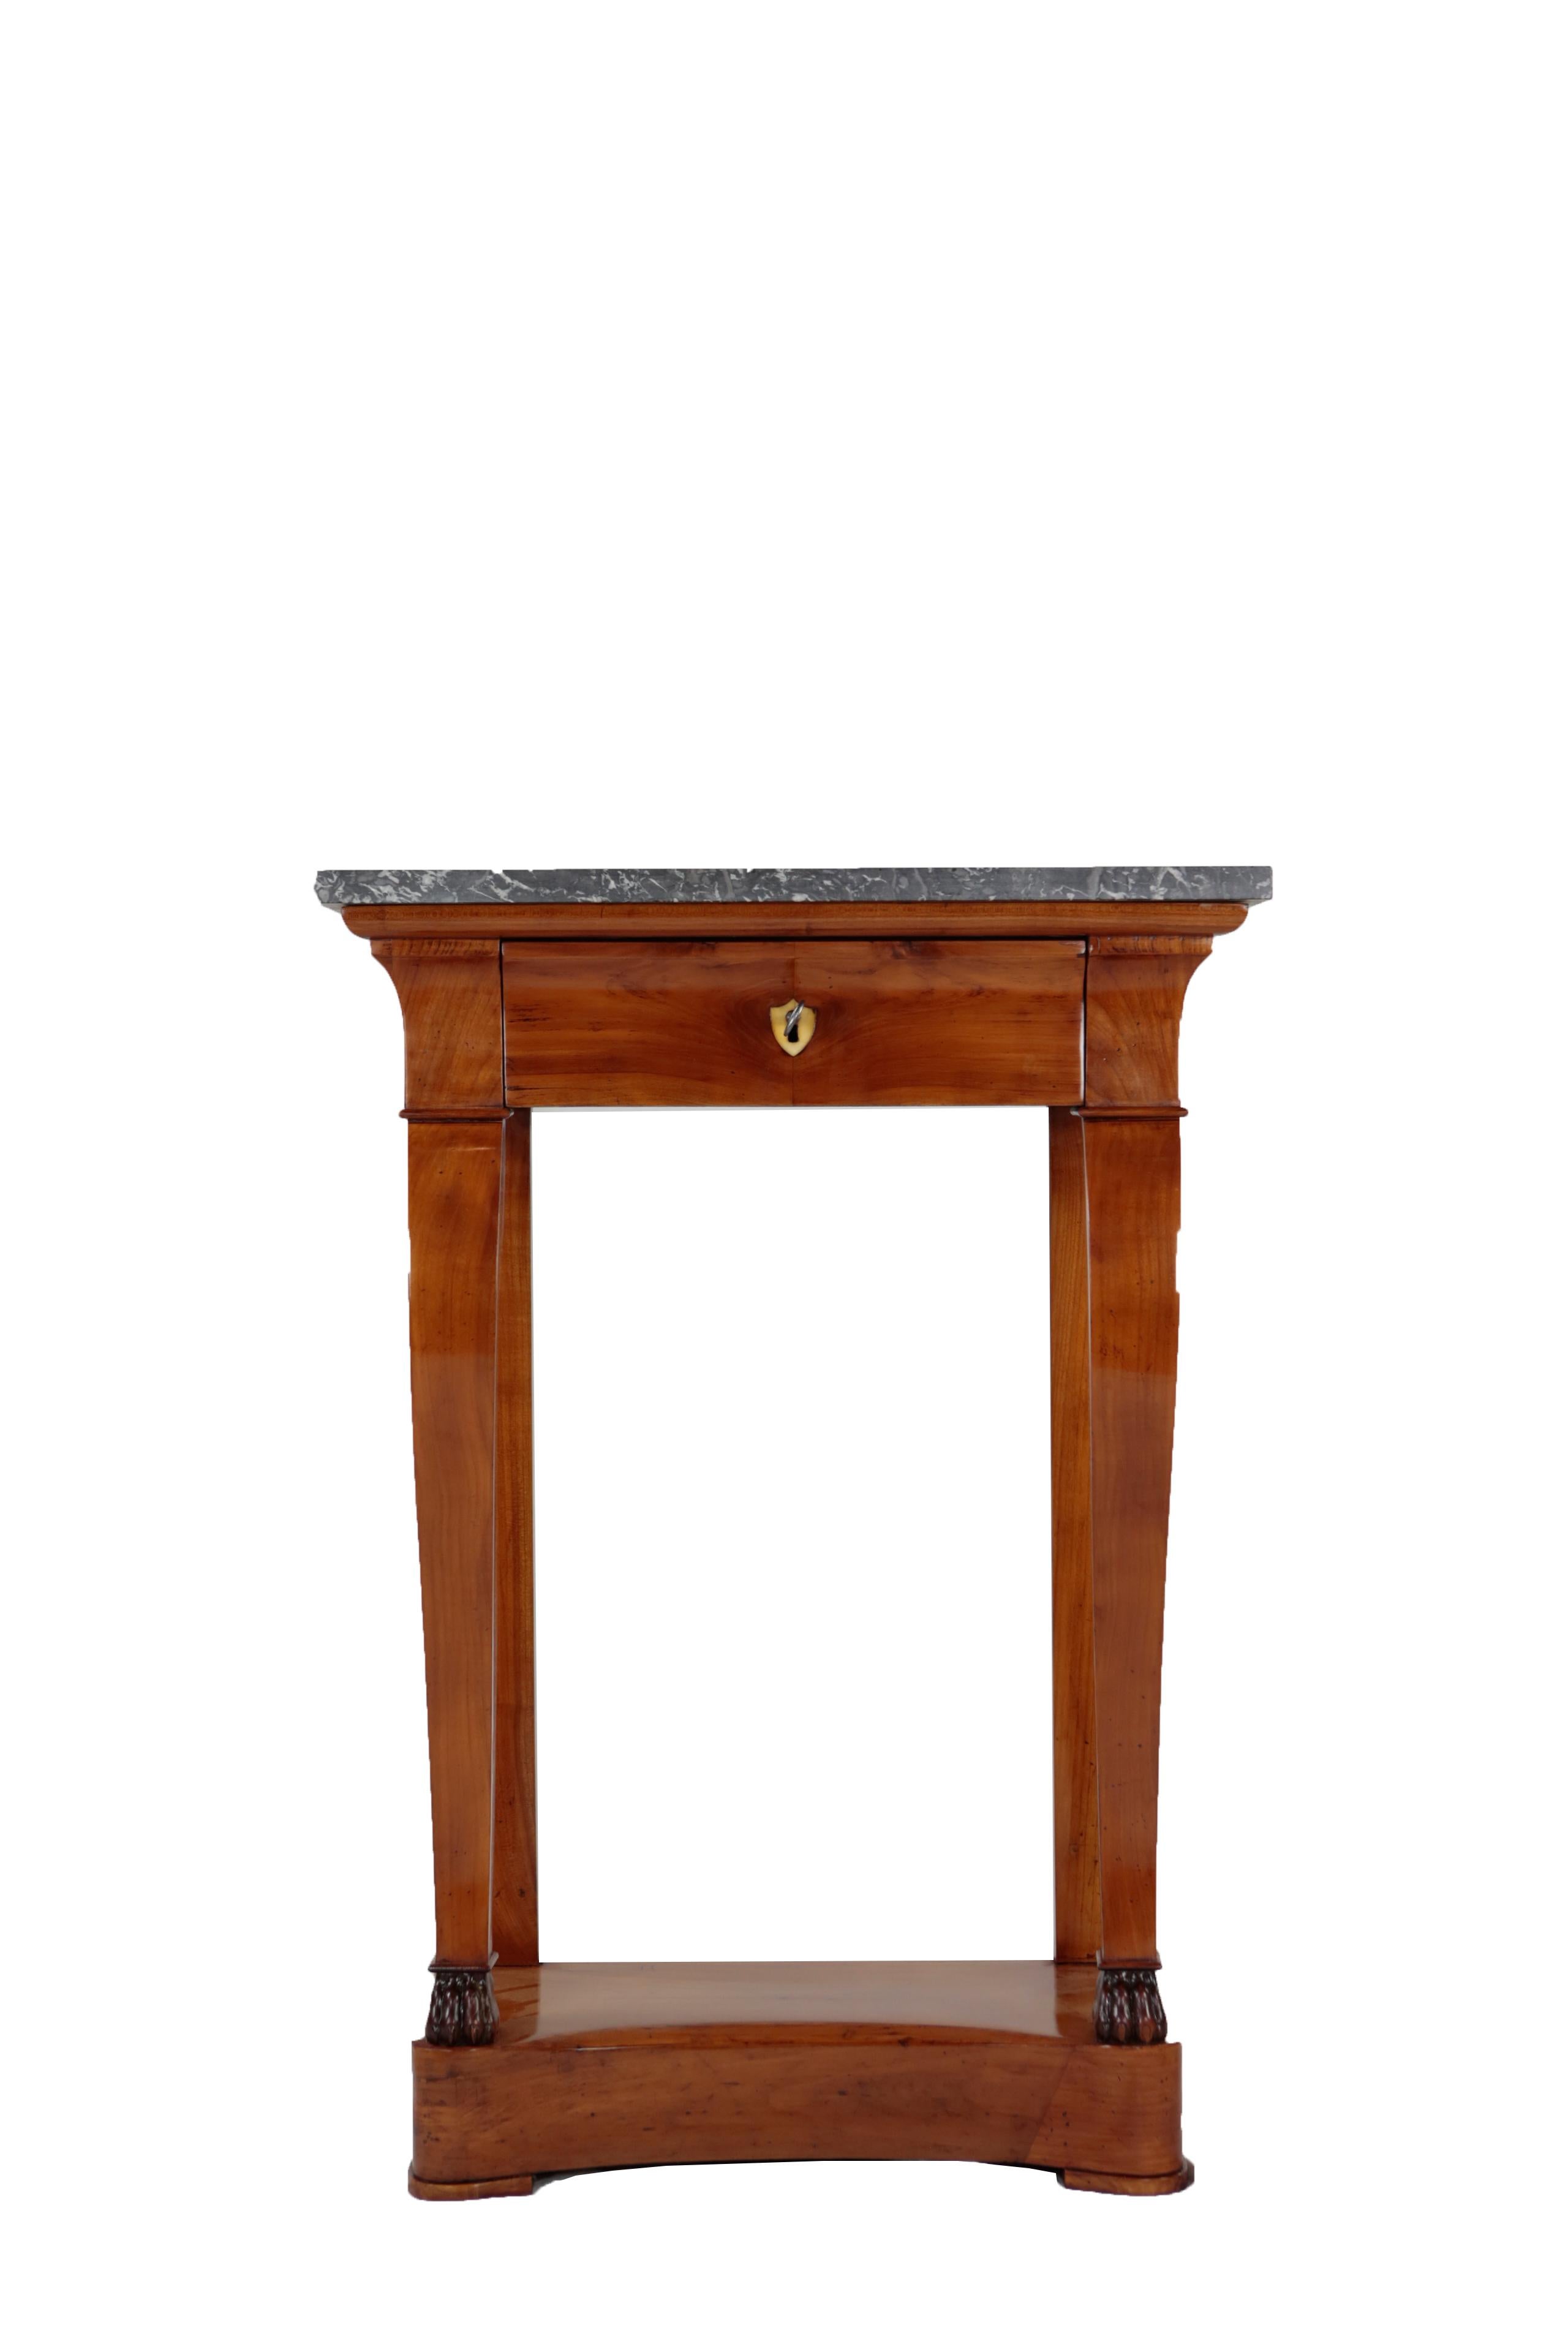 19th Century Biedermeier Period Console Table with Marble Top, Cherrywood Veneer For Sale 2